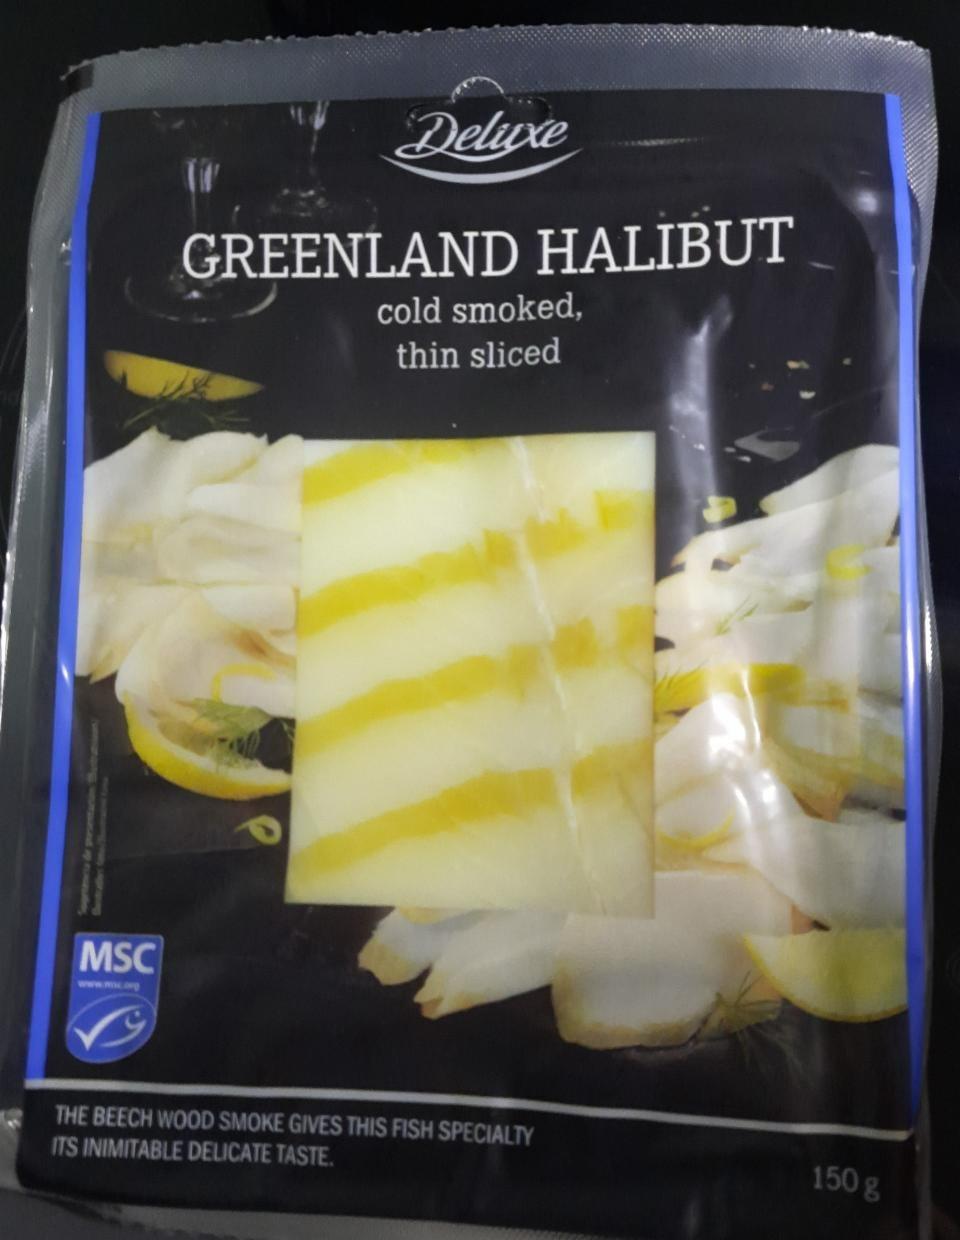 Fotografie - Greenland halibut cold smoked Deluxe